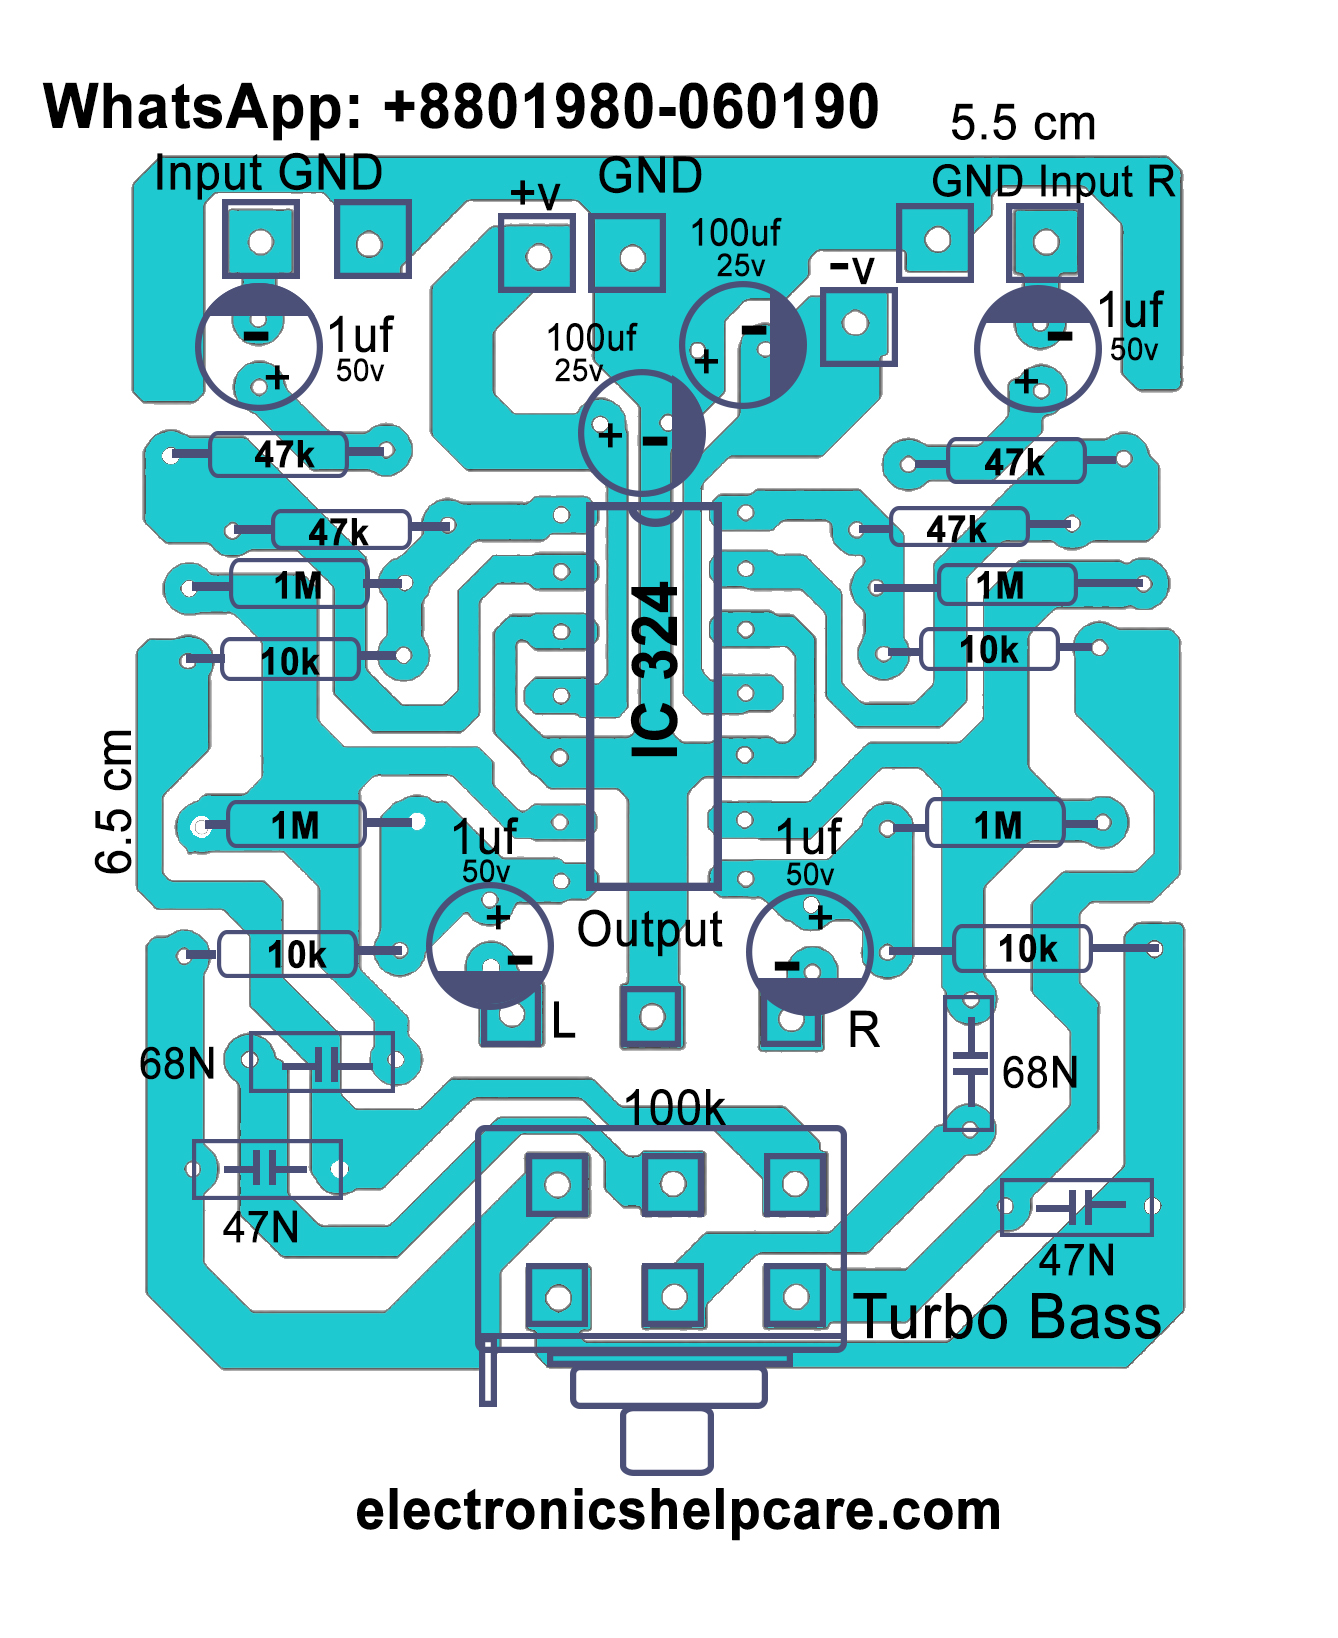 How to make turbo bass for amplifier circuit diagram?